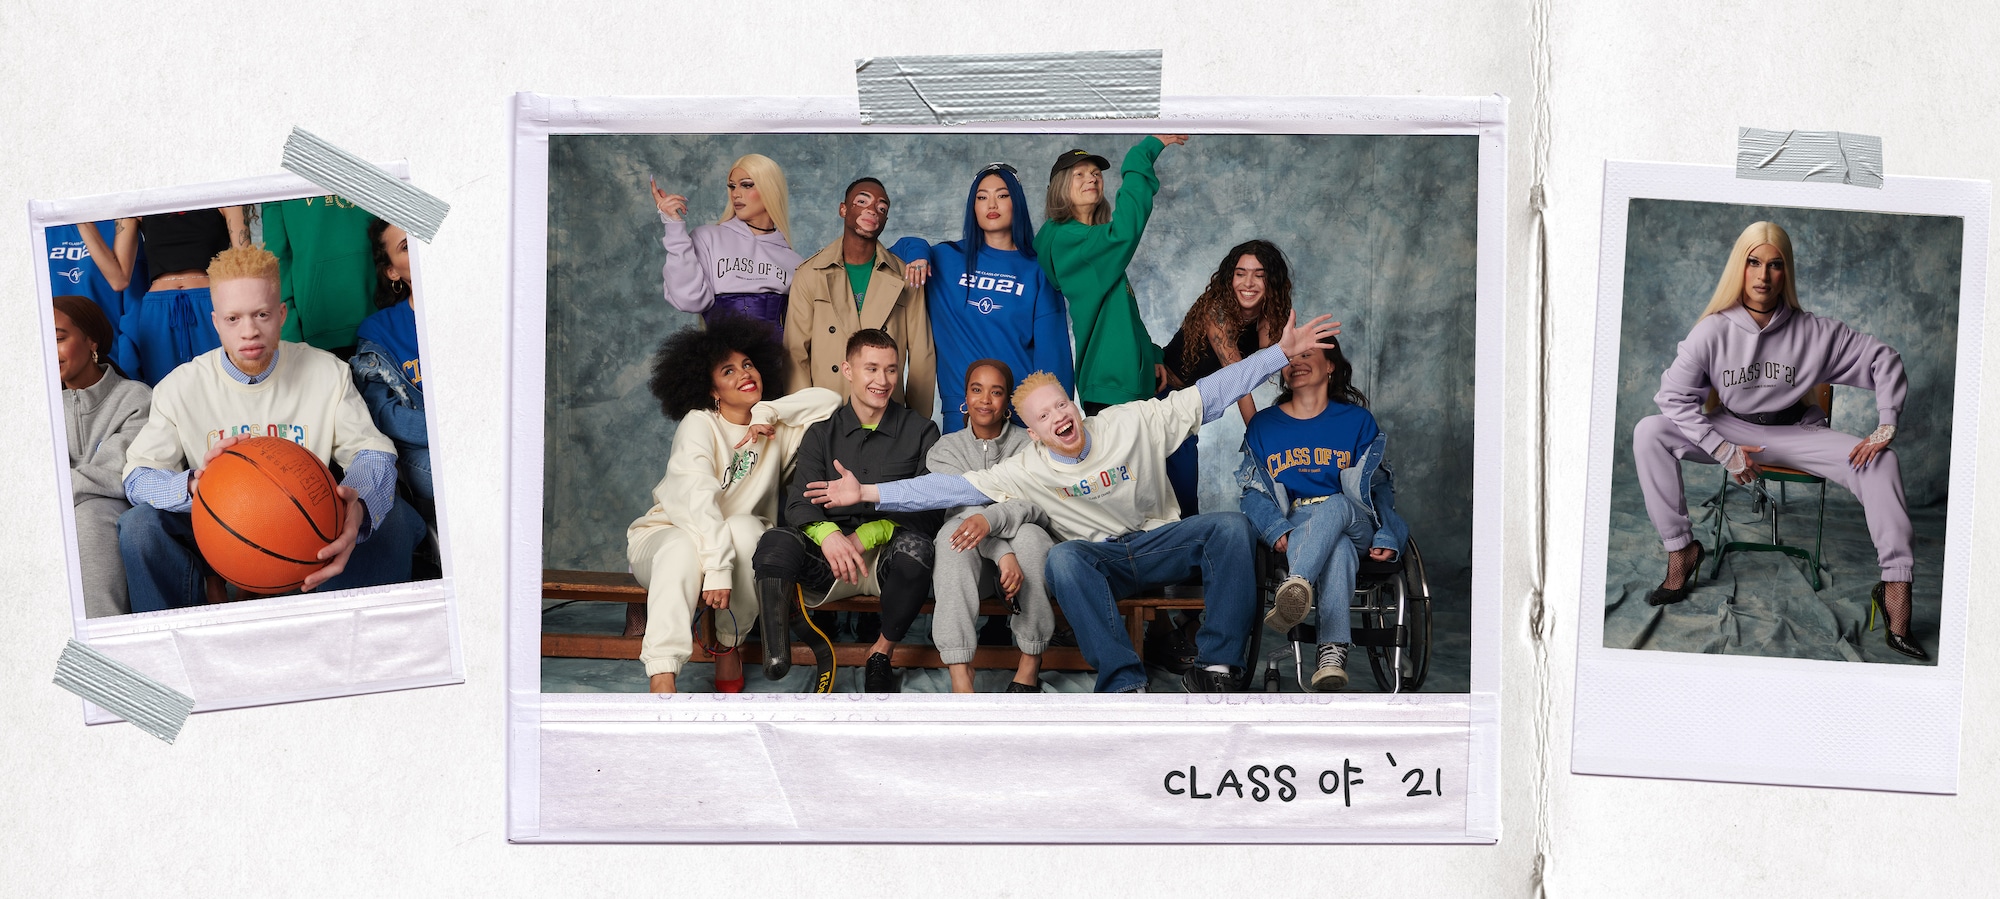 ABOUT YOU LIMITED Class of ‘21 - The New Faces of Fashion